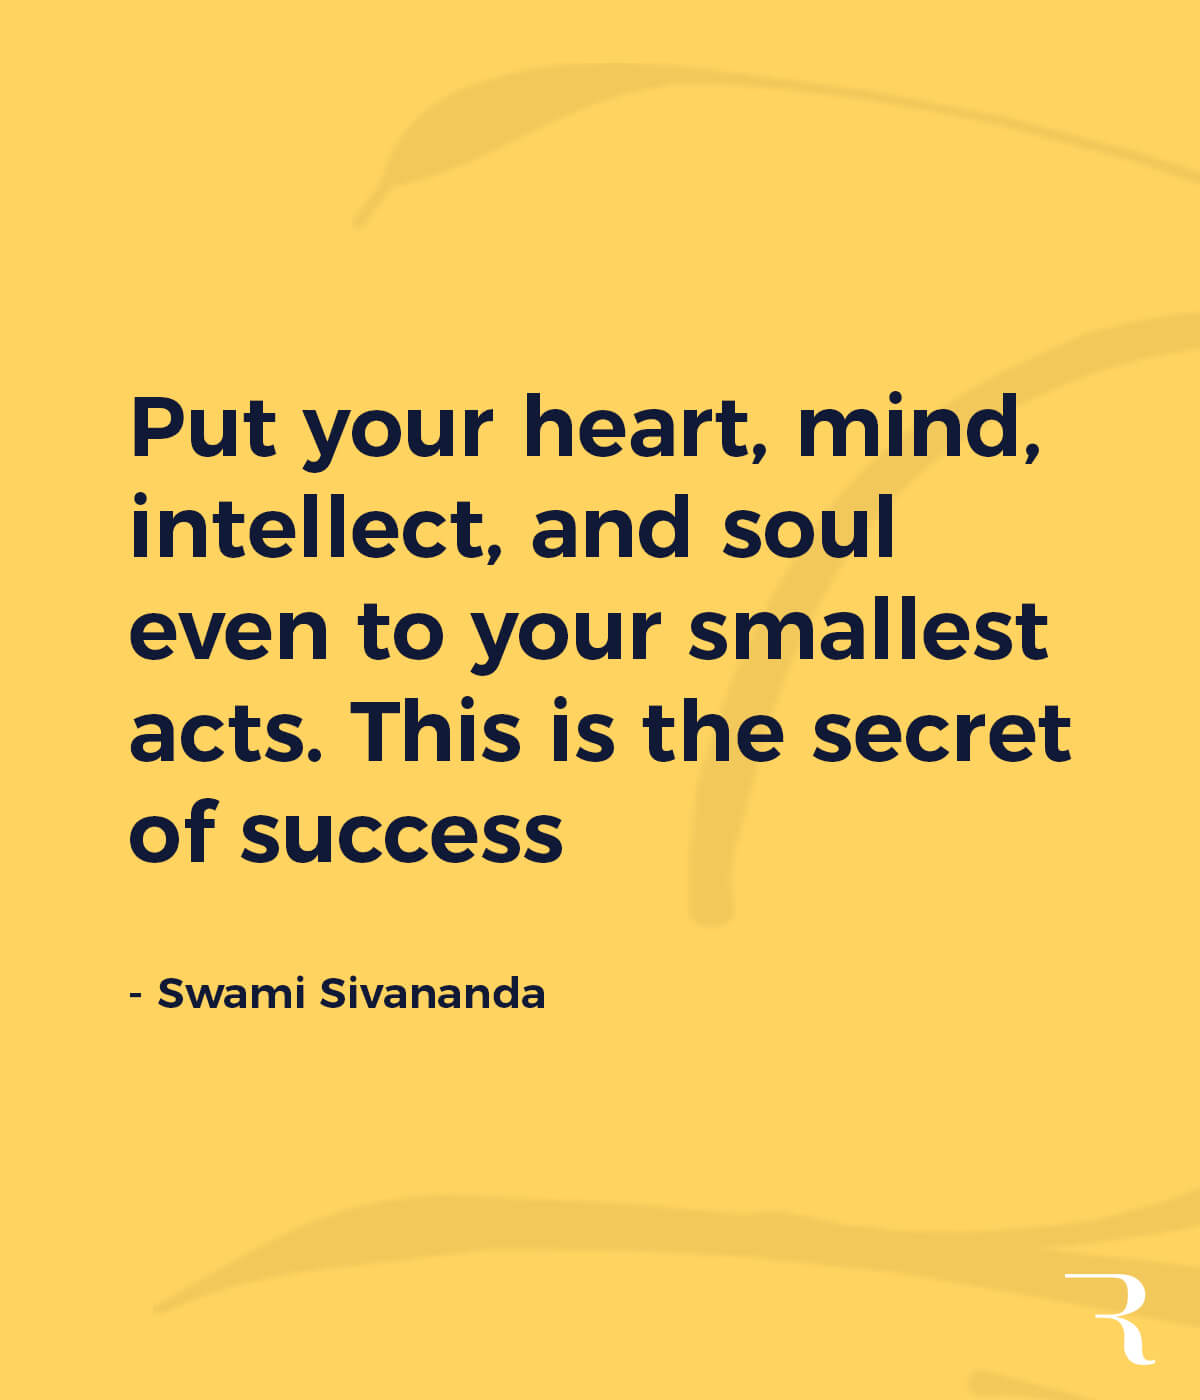 Motivational Quotes: "Put your heart, mind, intellect, and soul even to your smallest acts." 112 Motivational Quotes to Be a Better Entrepreneur